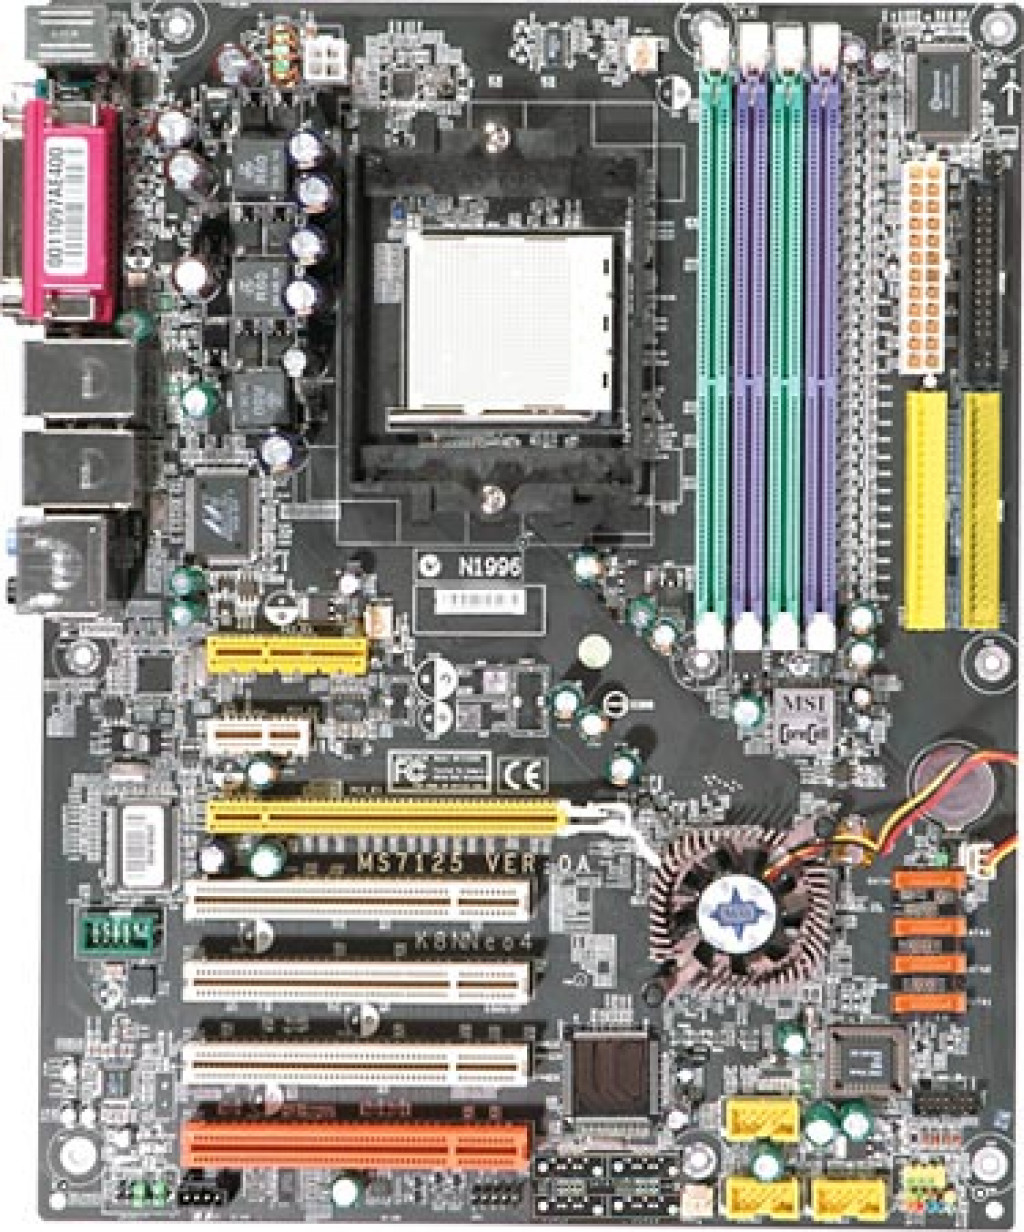 acpi x64 based pc motherboard drivers ethernet